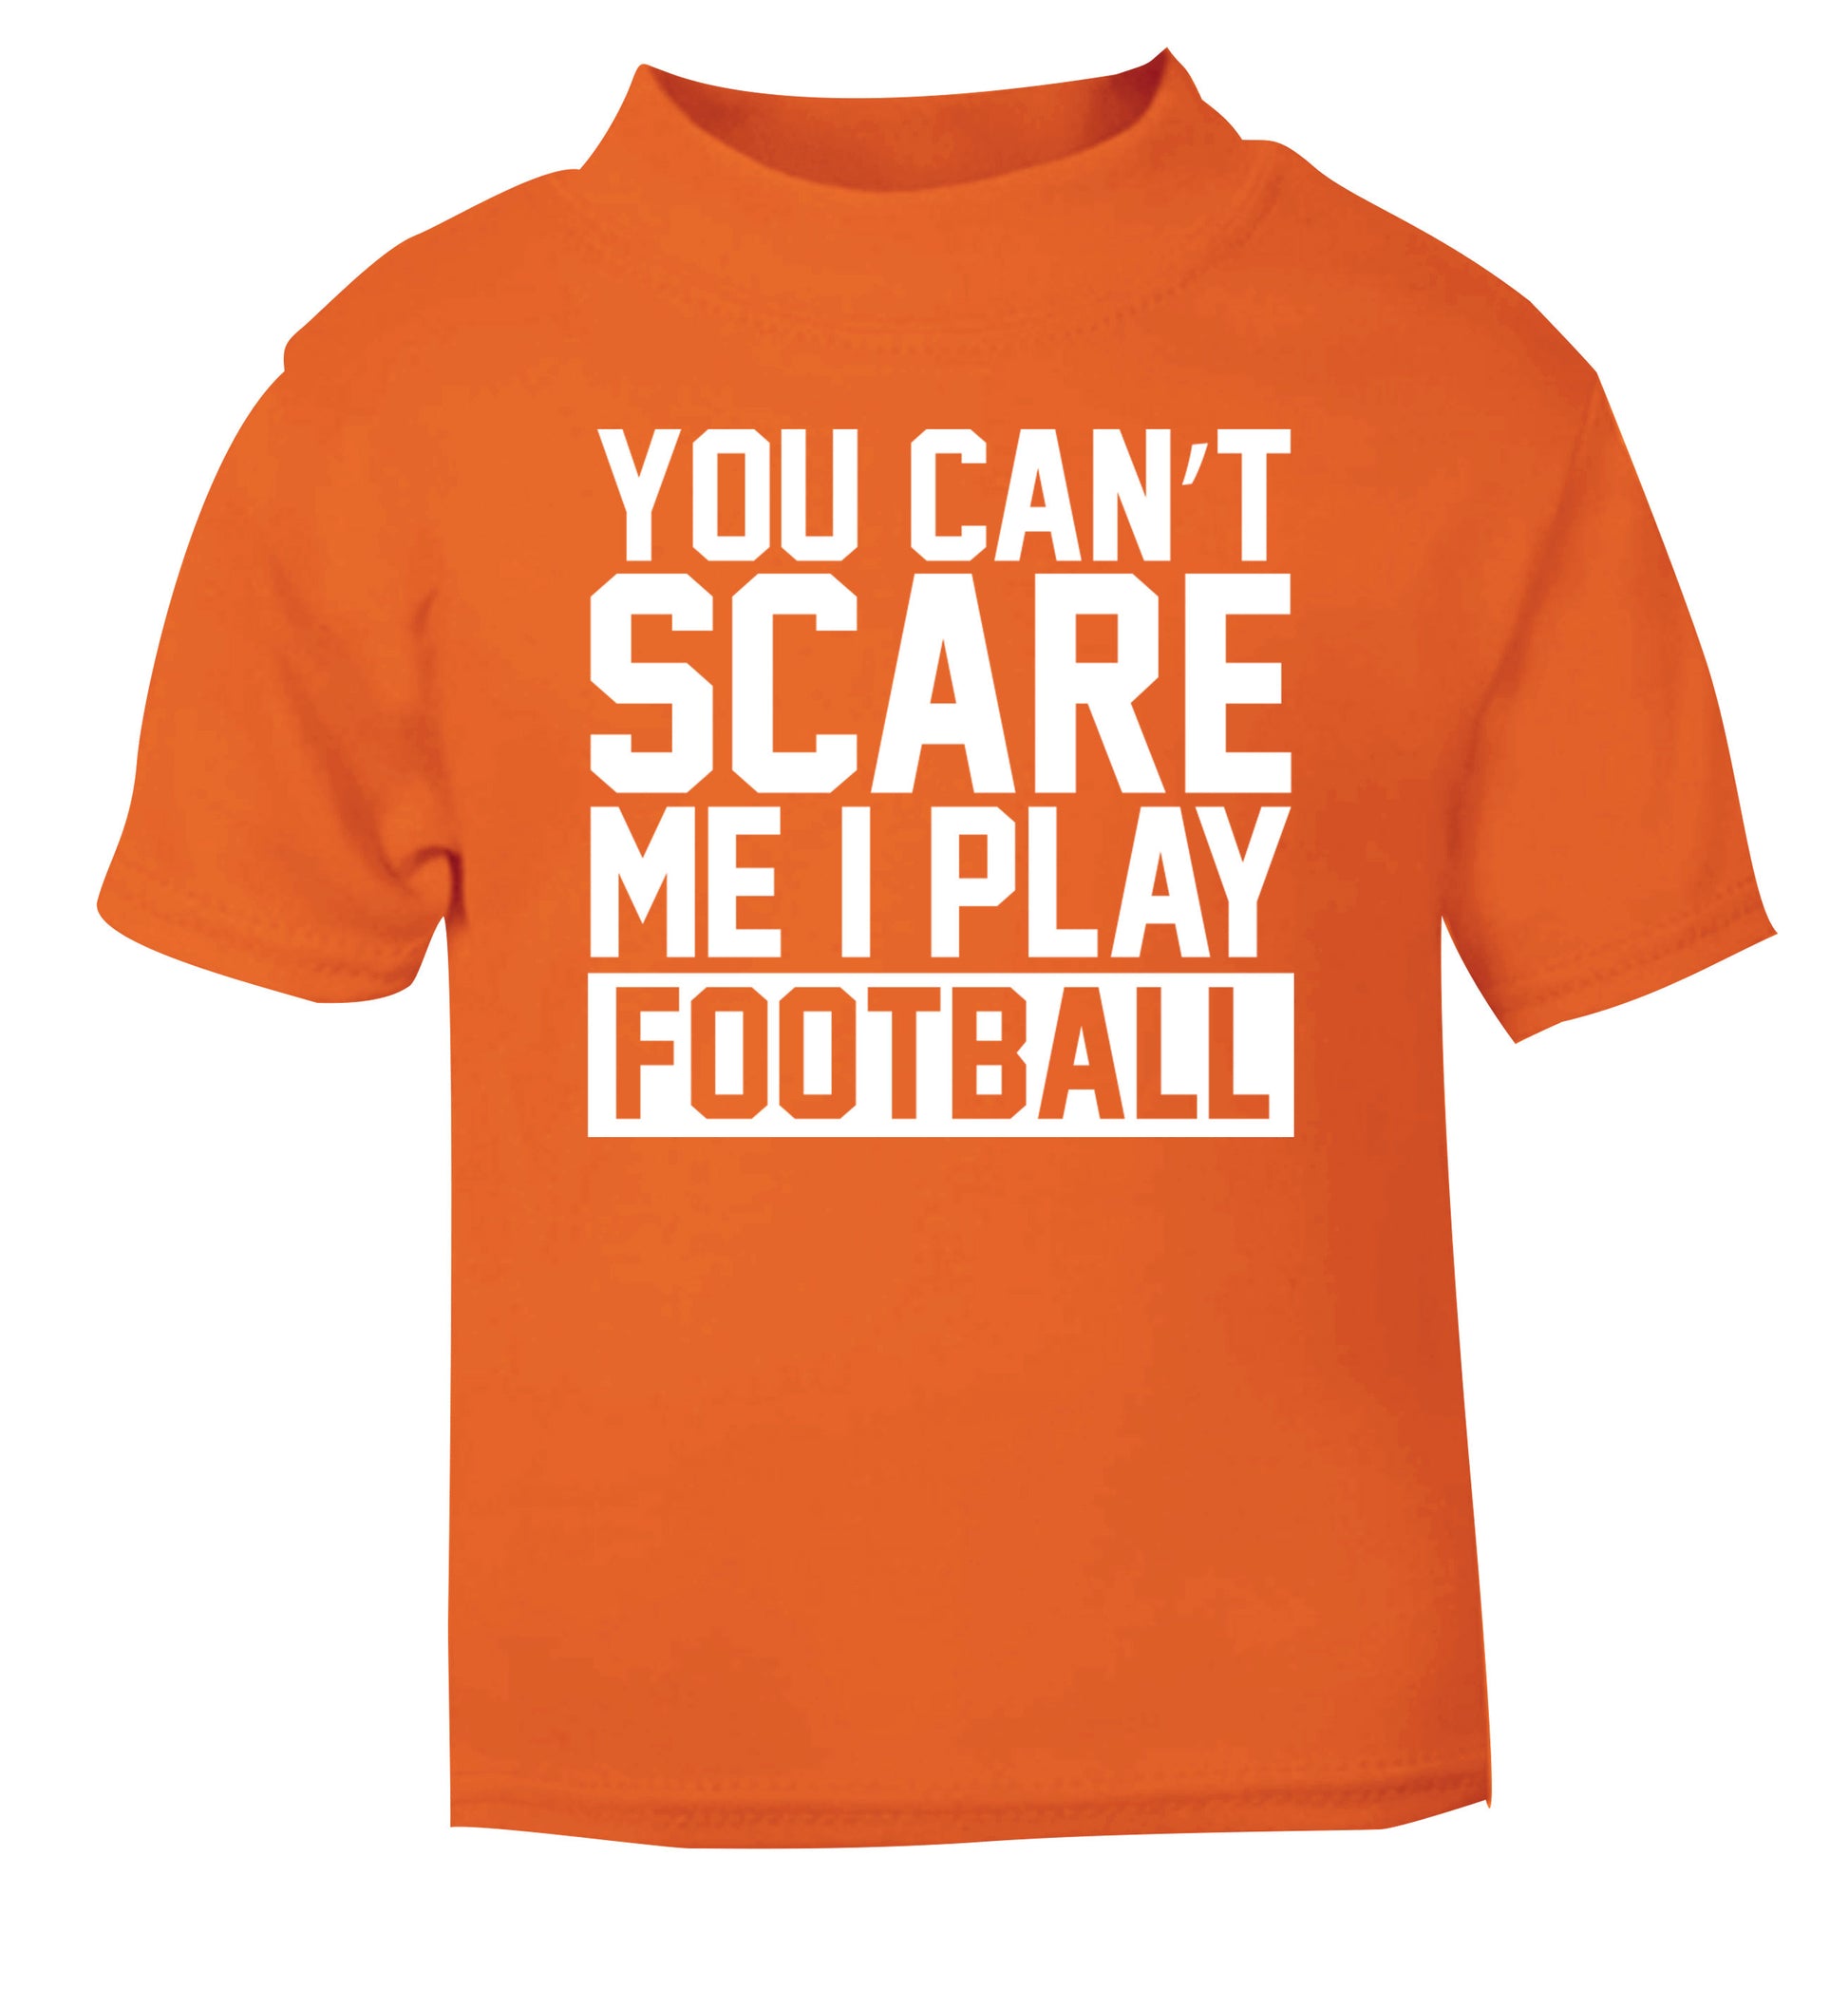 You can't scare me I play football orange Baby Toddler Tshirt 2 Years